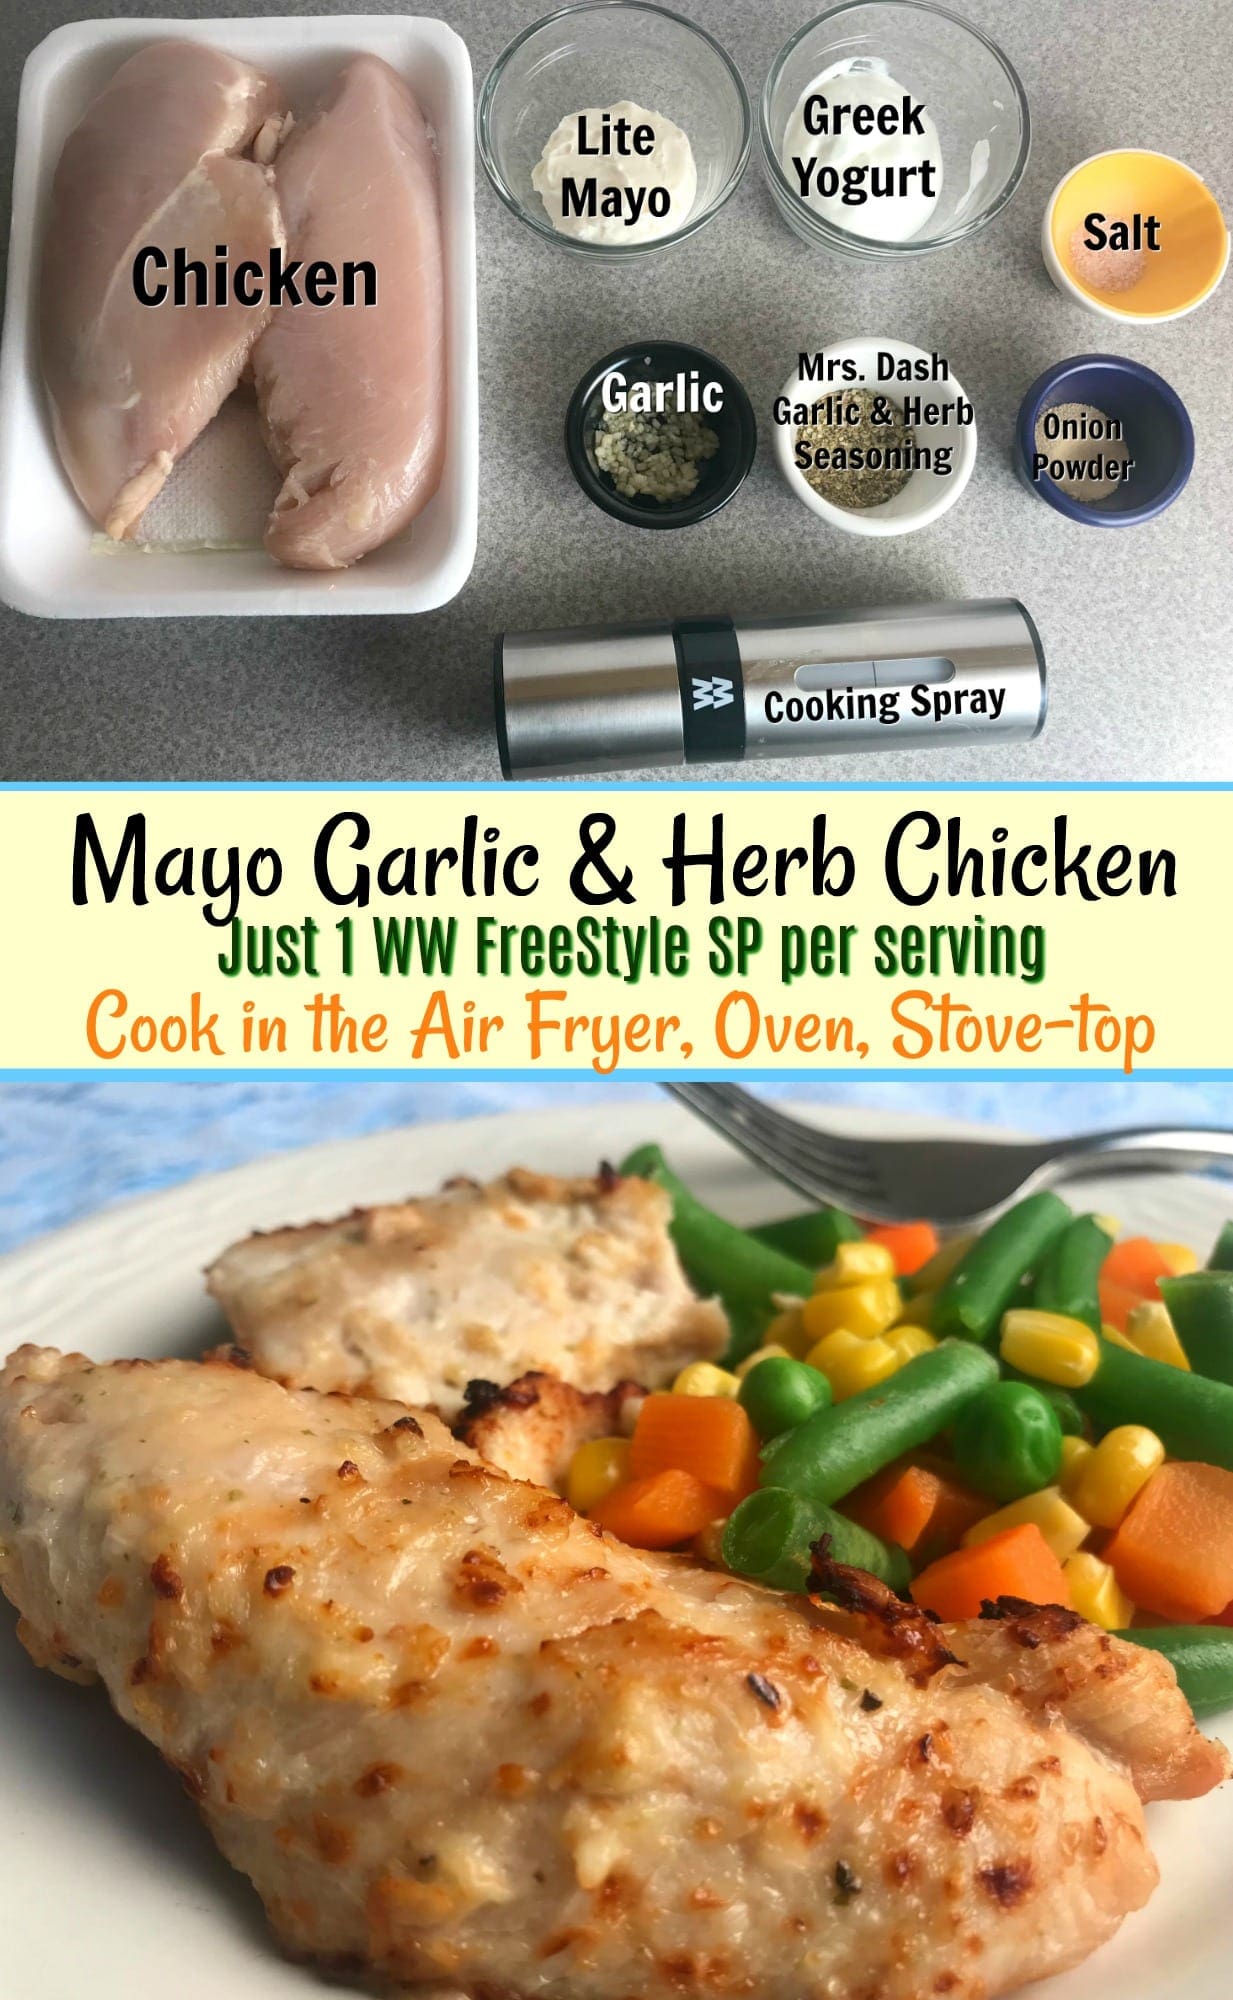 http://mealplanningmommies.com//wp-content/uploads/2018/01/This-Mayonnaise-Garlic-Herb-Chicken-is-just-1-WW-SmartPoint-per-serving-and-can-be-cooked-in-the-air-fryer-oven-or-on-the-stove-top.jpg